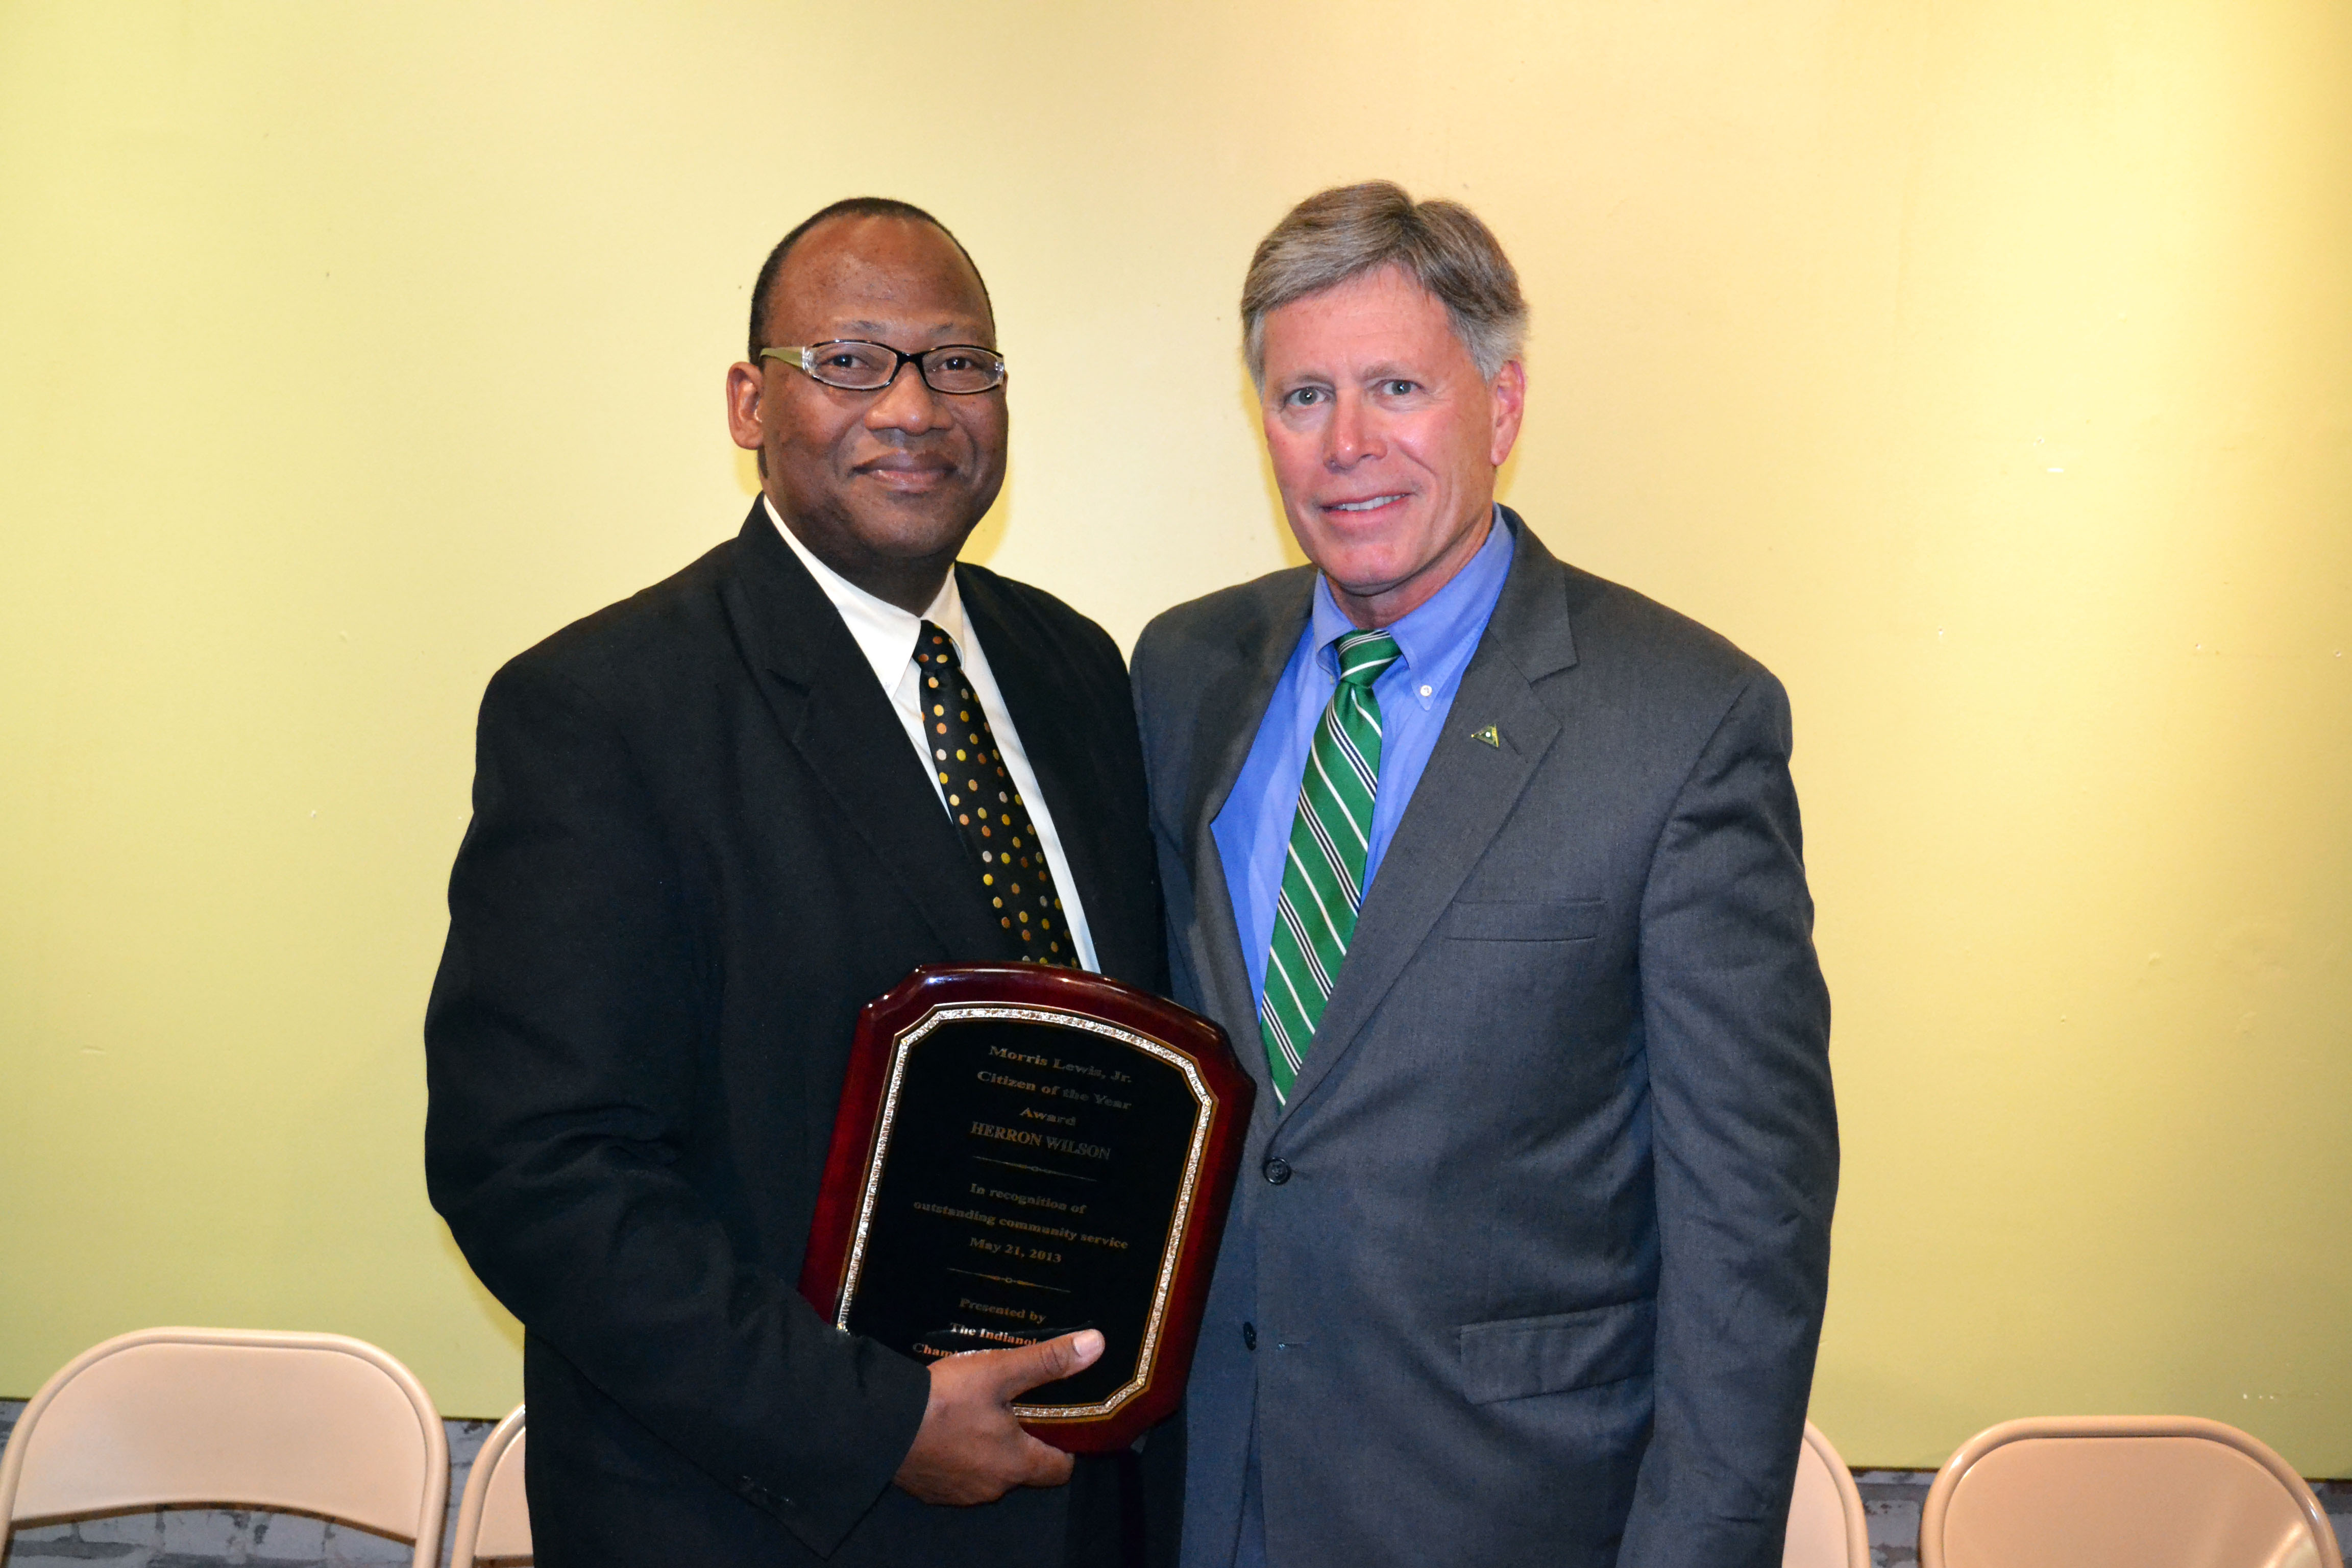 PHOTO:  Pictured are Rev. Herron Wilson, recipient of the Morris Lewis Jr. Citizen of the Year Award, and Delta State University President, William N. LaForge.      